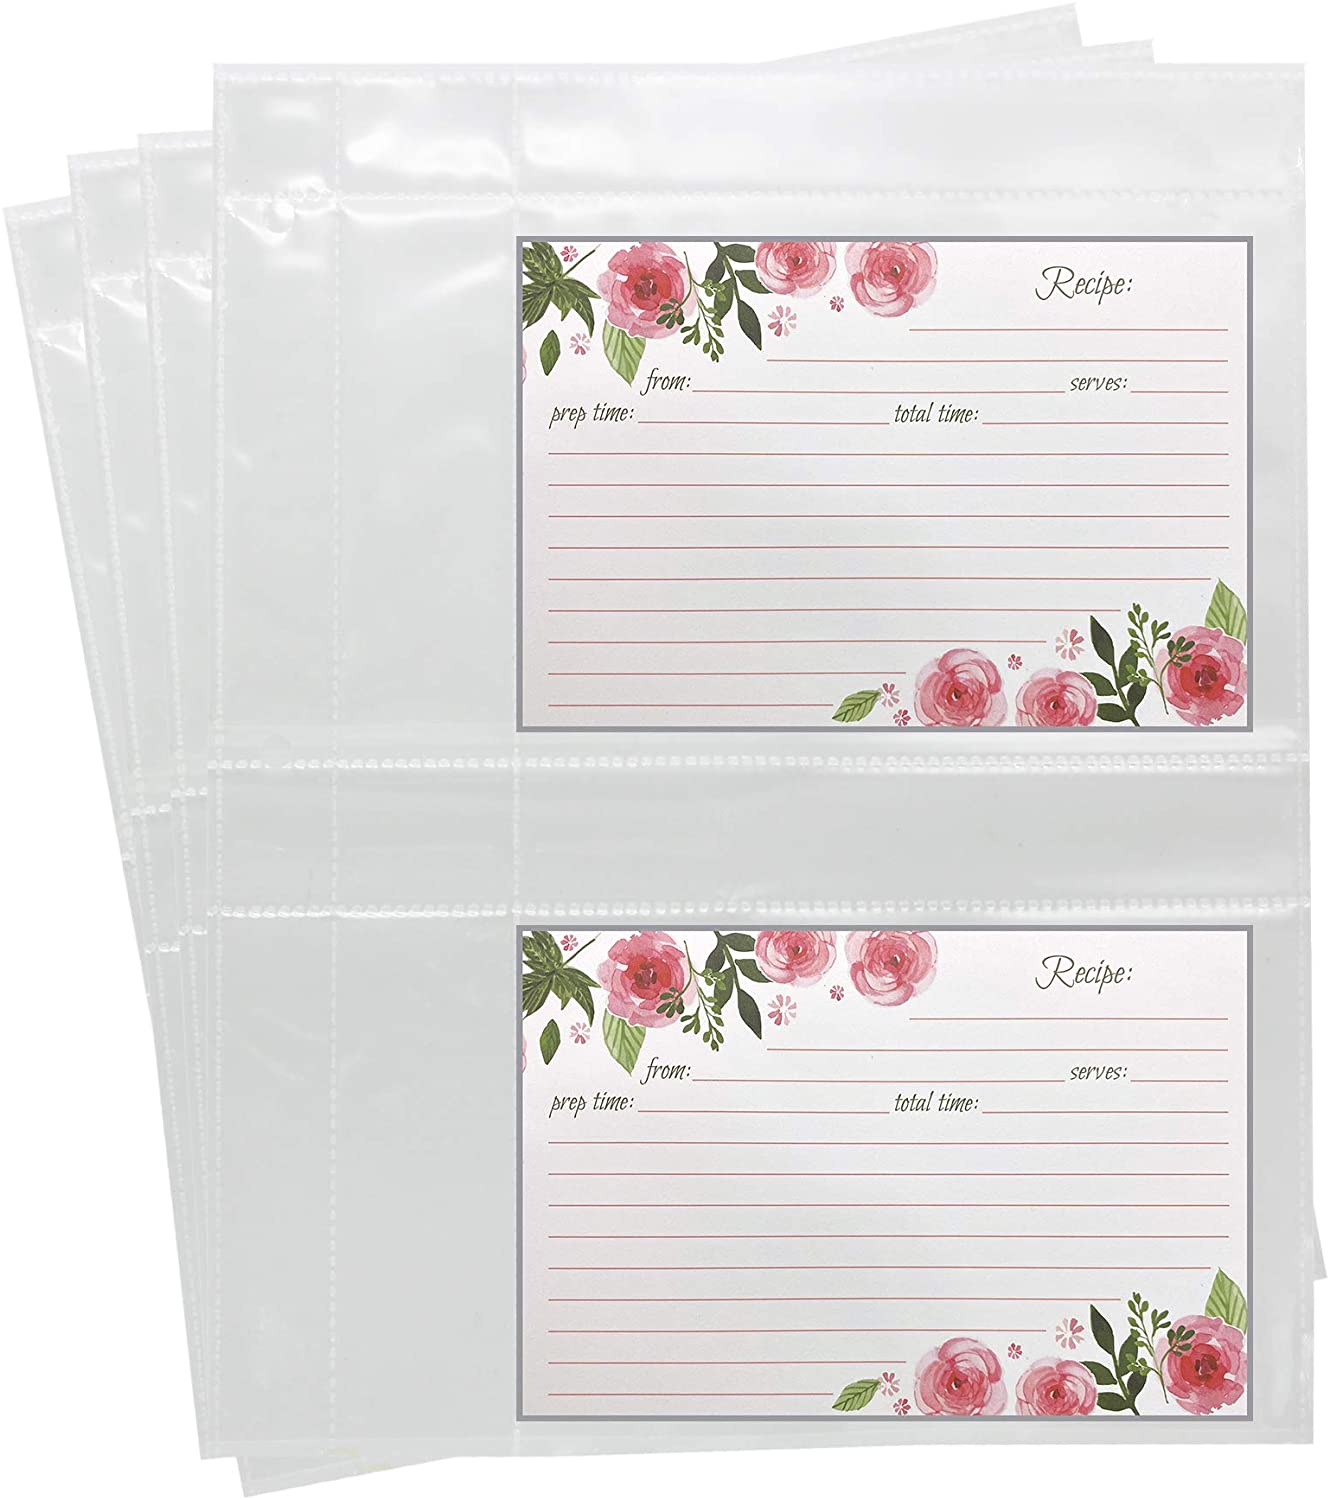 Recipe Card Protectors, For 3 Ring Binders, Page Sheet Protectors, Holds 4 x 6-inch pockets, 4 Cards Per Sheet, Clear - 50 Pack